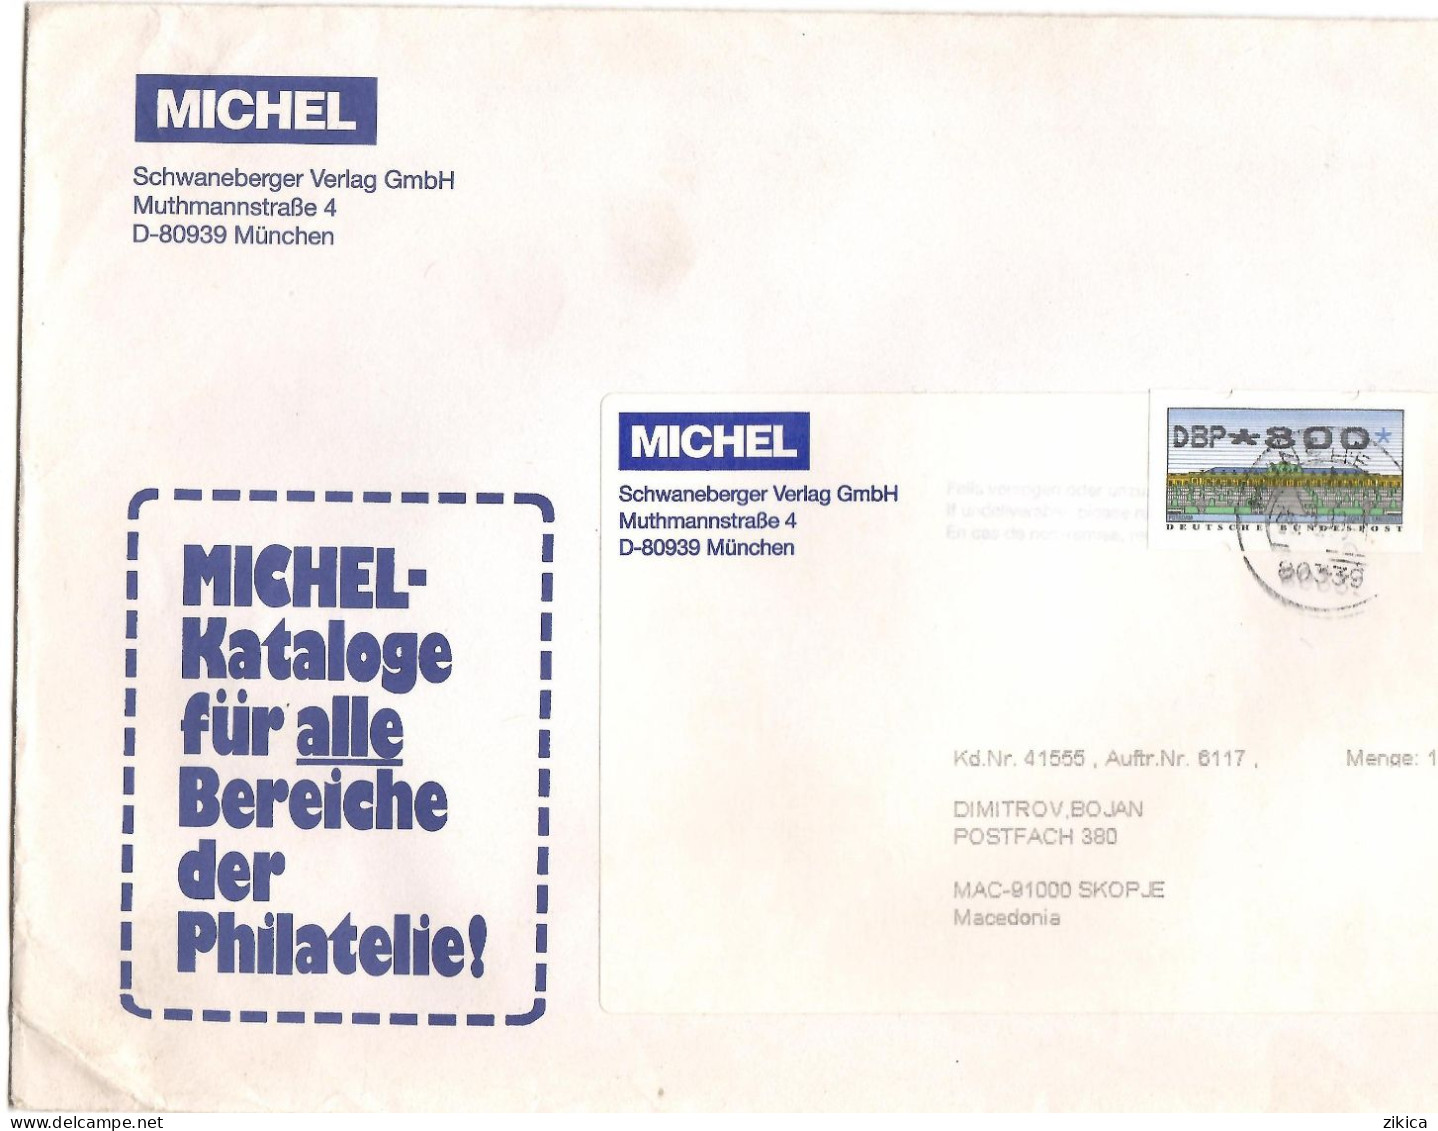 GERMANY - BIG COVER - Letter 1999 - DBP * 800,post Label - Covers & Documents